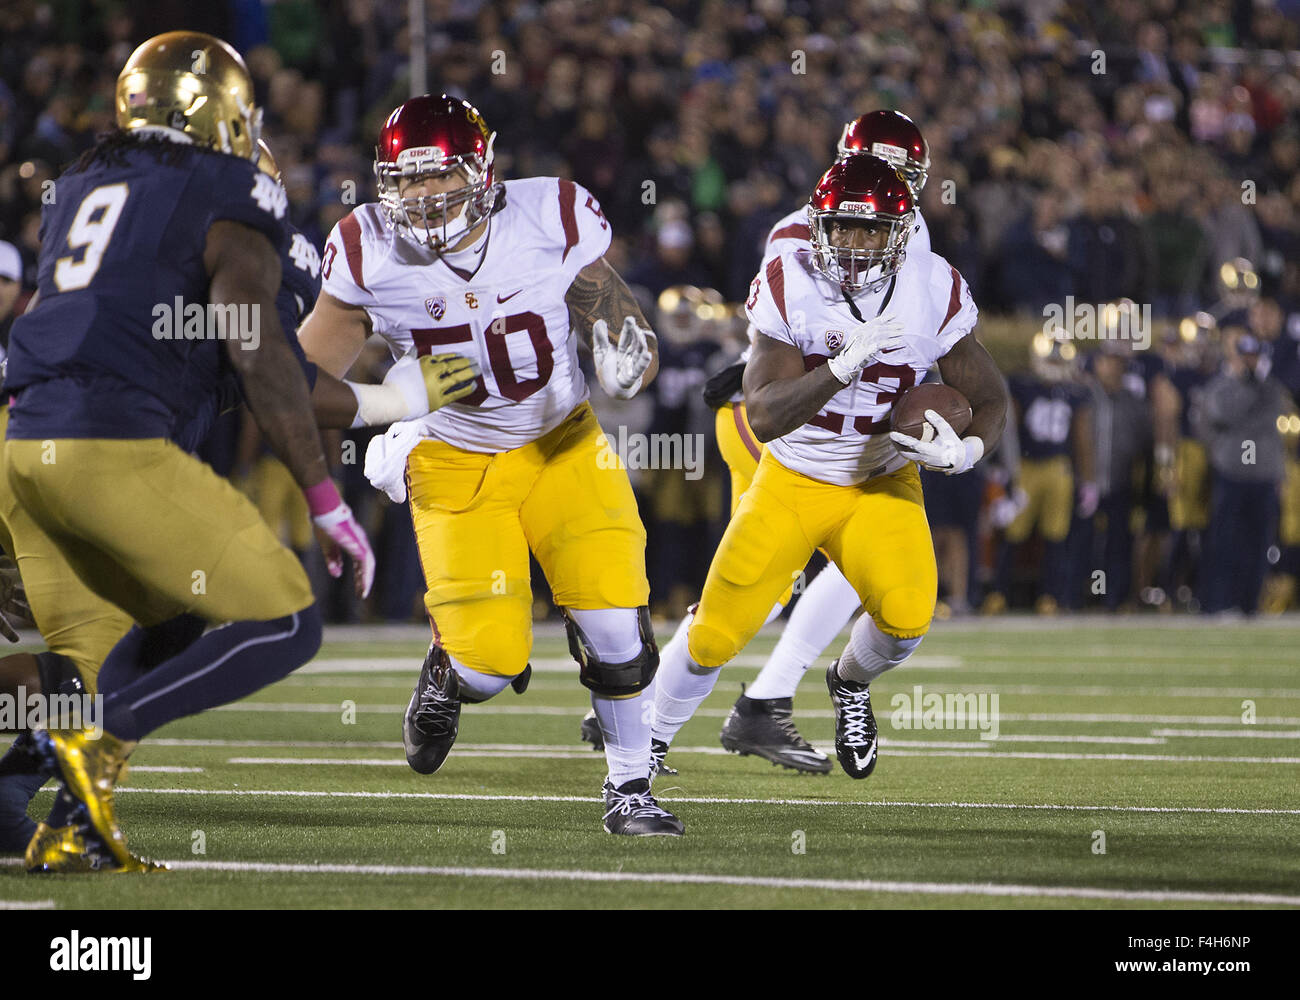 South Bend, Indiana, USA. 17th Oct, 2015. USC running back Tre Madden (23) runs with the ball during NCAA football game action between the USC Trojans and the Notre Dame Fighting Irish at Notre Dame Stadium in South Bend, Indiana. Notre Dame defeated USC 41-31. John Mersits/CSM. © csm/Alamy Live News Stock Photo